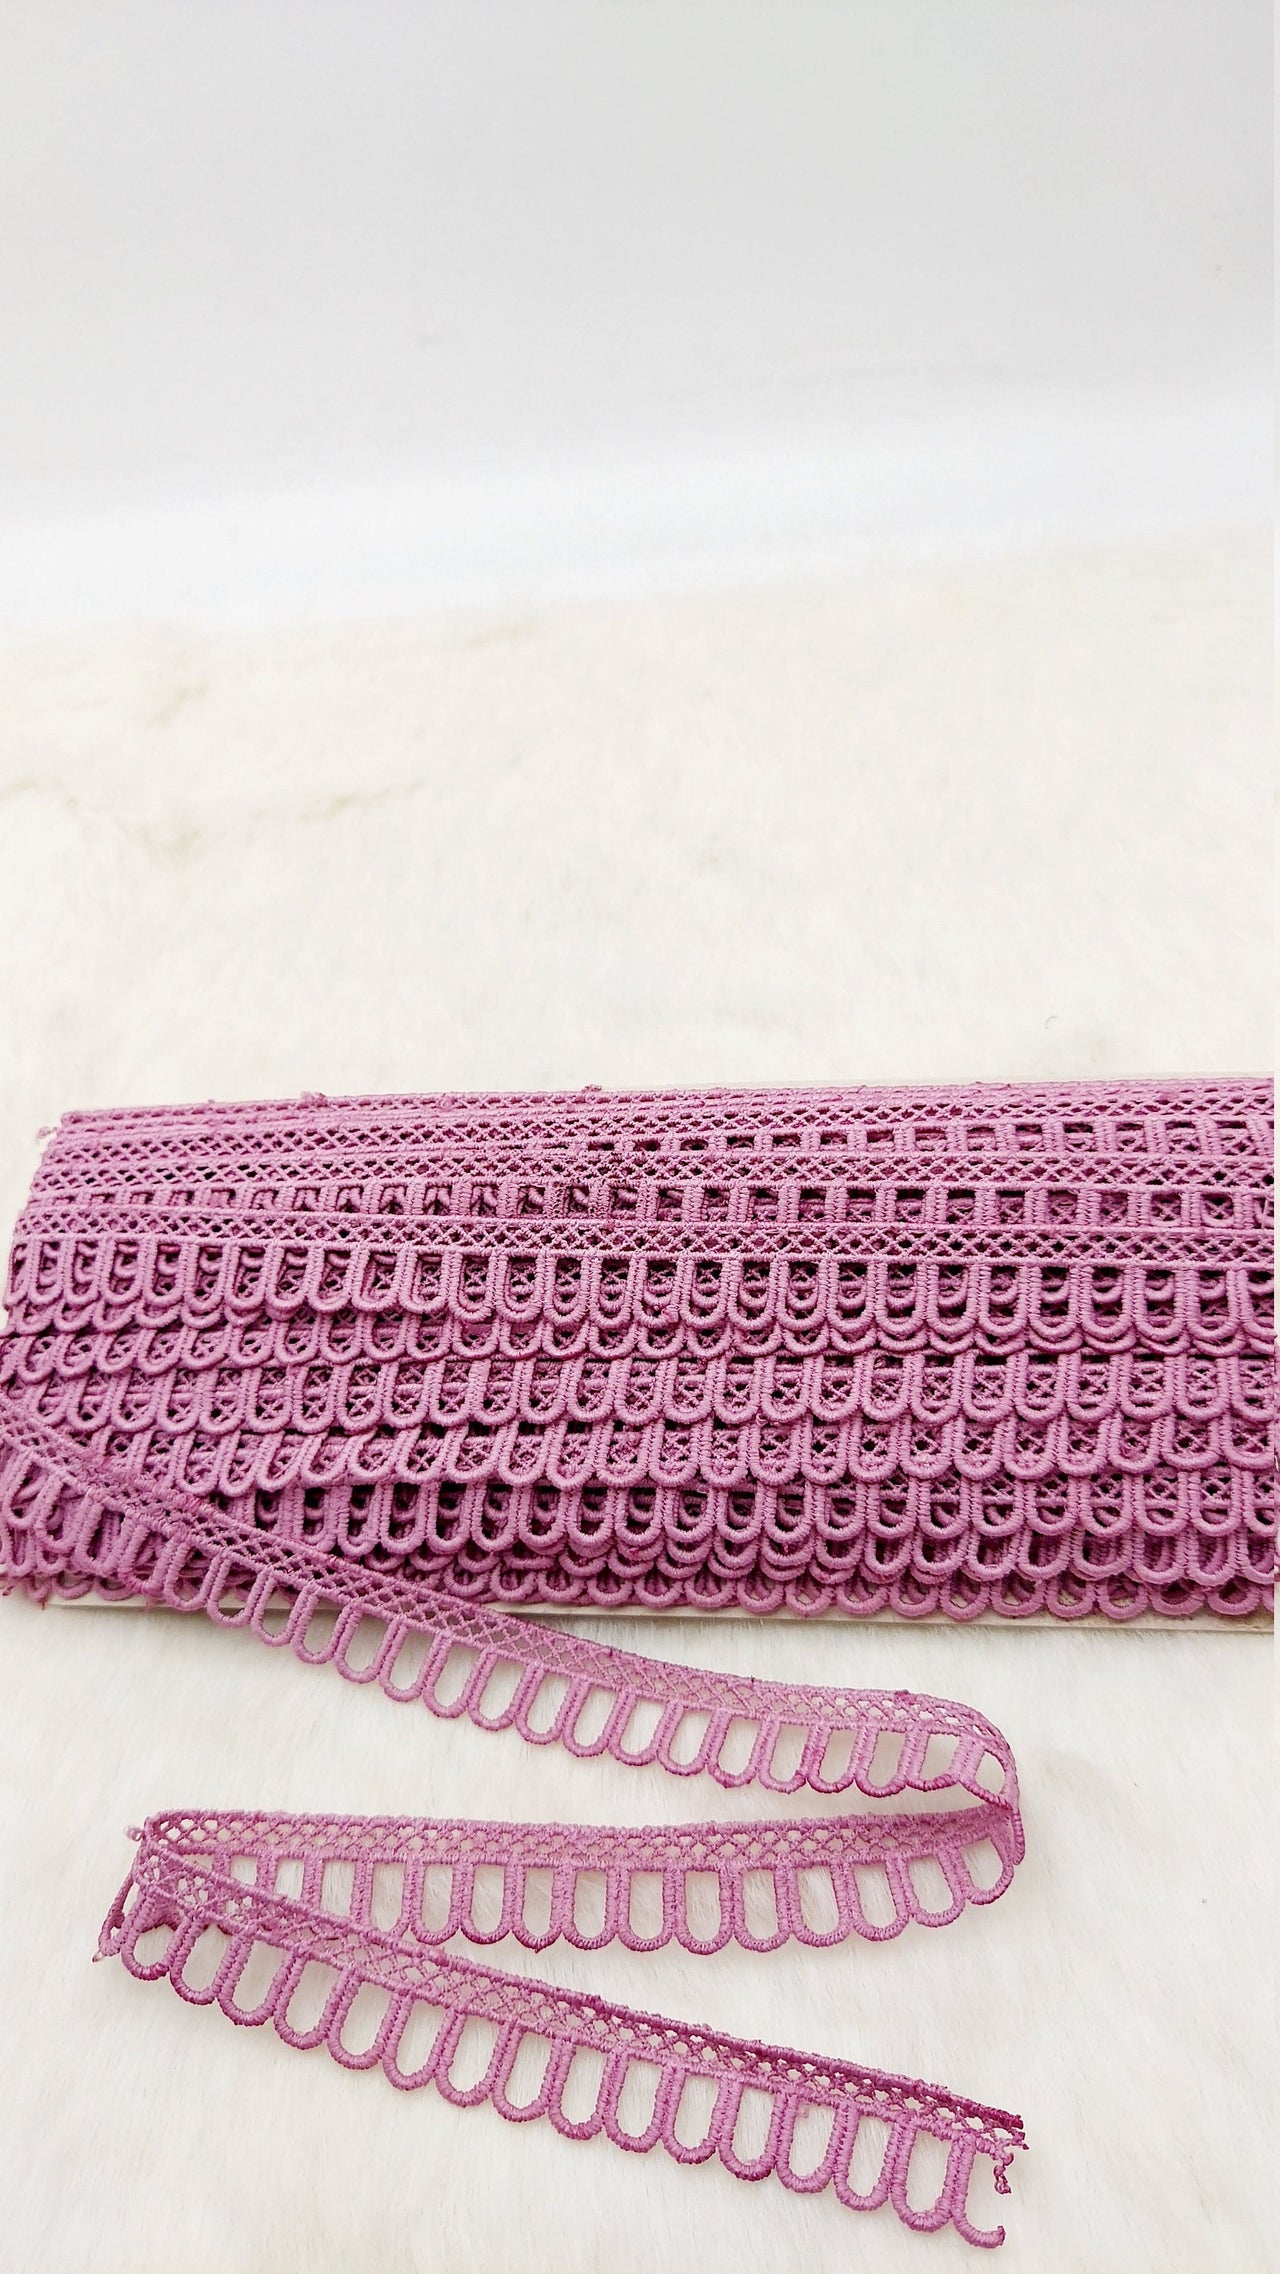 9 Yards Mauve Pink Embroidery Cotton Lace Trim, Approx. 20mm Wide, Fringe Trim